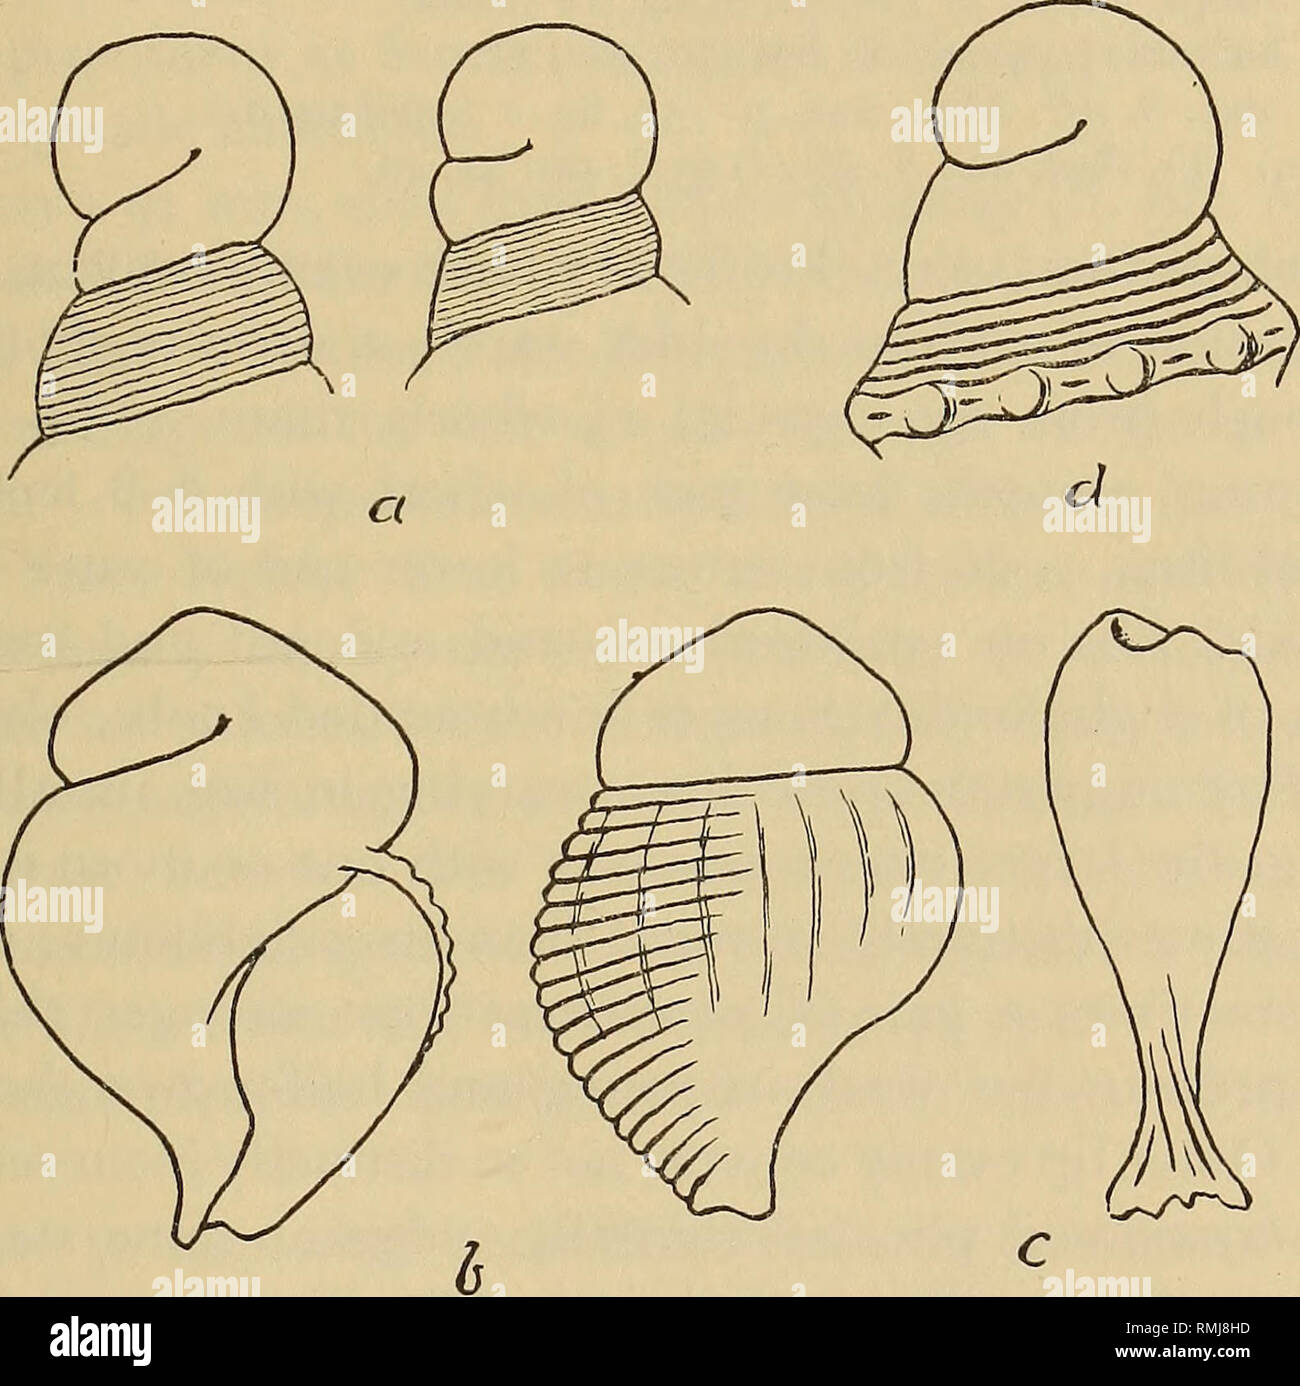 . Annals of the South African Museum = Annale van die Suid-Afrikaanse Museum. Natural history. CONTRIBUTIONS TO KNOWLEDGE OF S.A. MARINE MOLLUSGA 75 a little stronger and more widely spaced on later whorls. Parietal callus present; columella with 3 pleats, but posterior one feeble and obscure in large specimens. Canal long, narrow, sigmoid; outer lip thin, not plicate internally. Periostracum thin. 132 X 51 mm. Operculum 35 X 19 mm. in 132 mm. shell. White with pale yellowish brown periostracum, operculum dark brown. Radula with 230-250 rows, usually an accessory denticle externally on both si Stock Photo